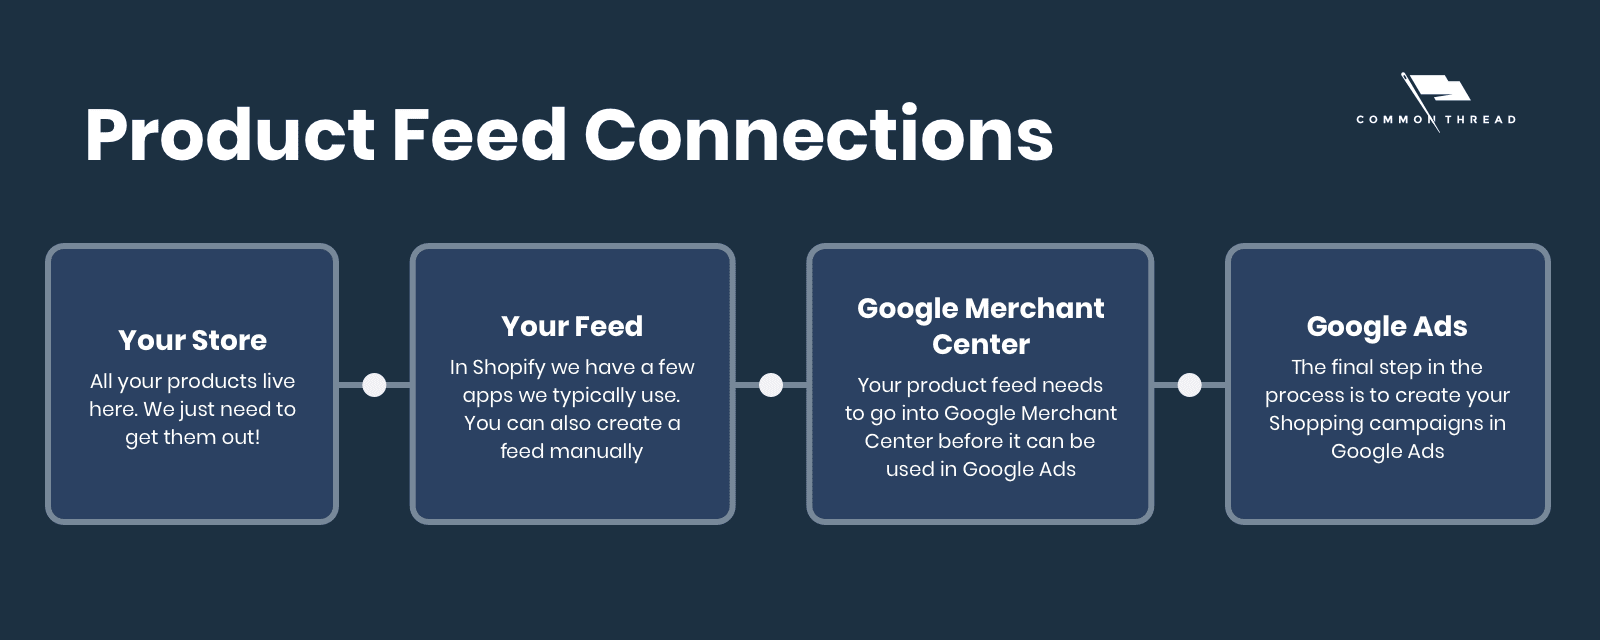 Google Product Feed Connections